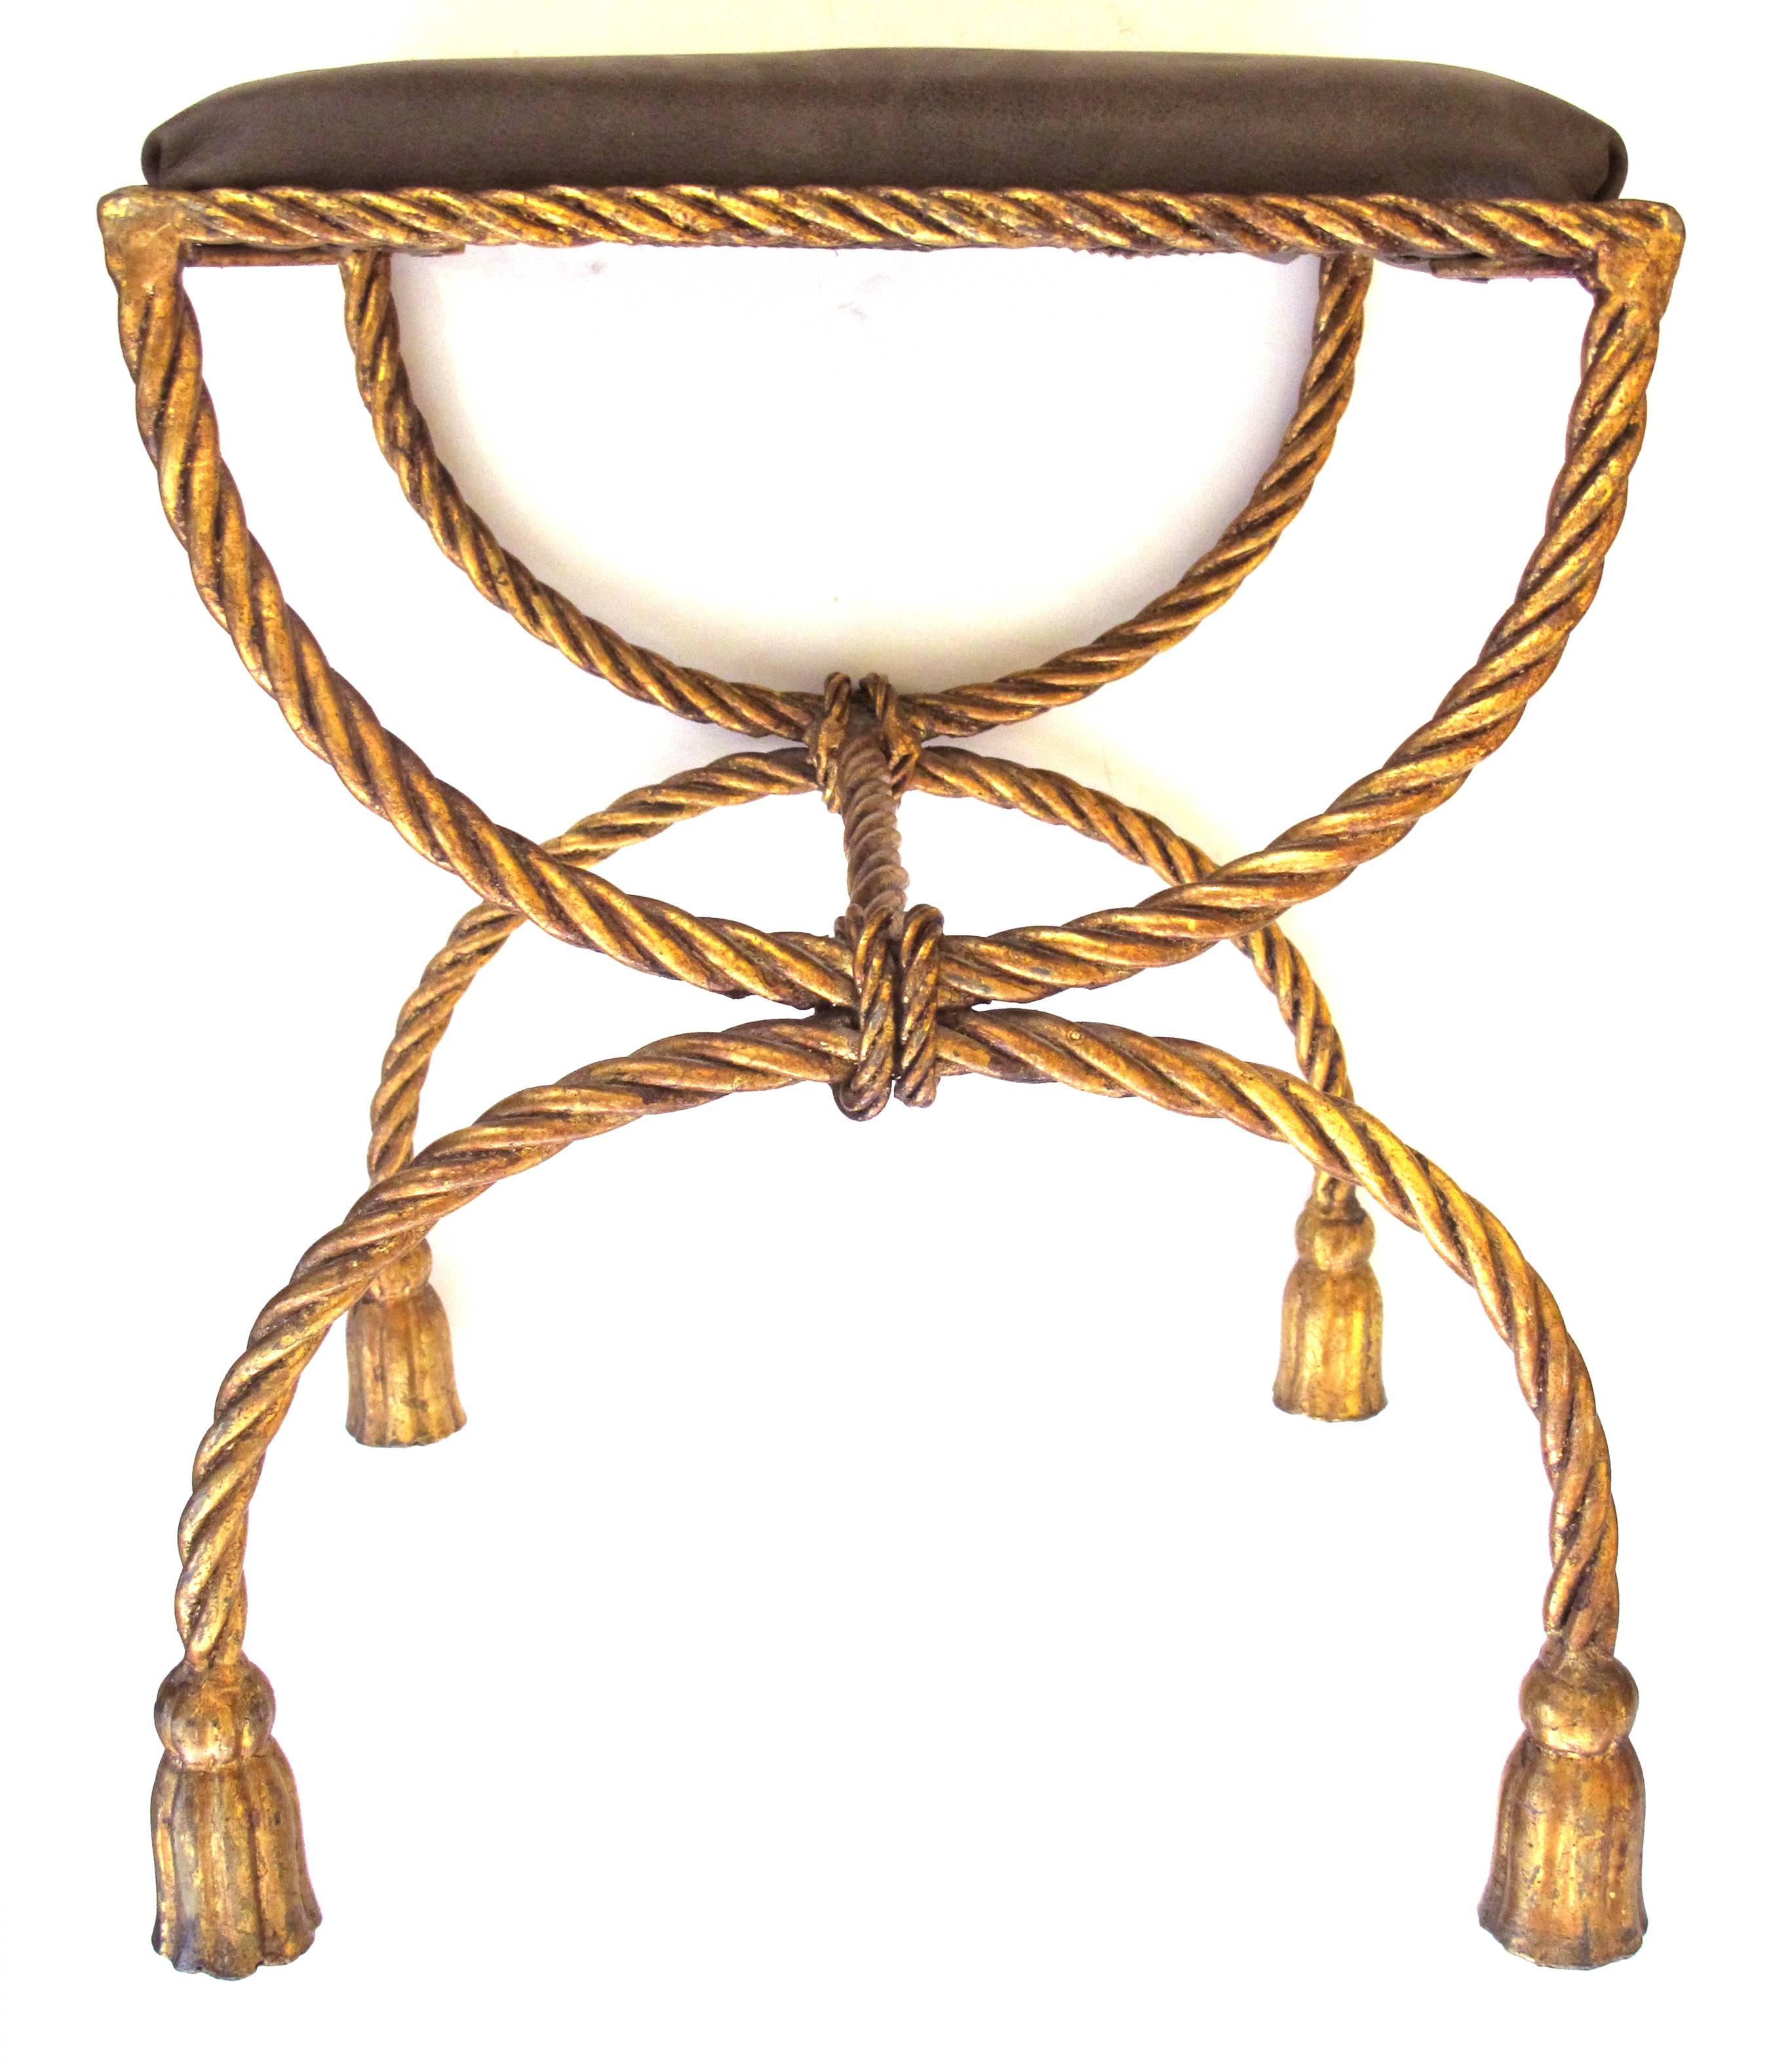 Shapely Italian 196's Gilt Iron Rope-Twist Curule-Form Bench 1